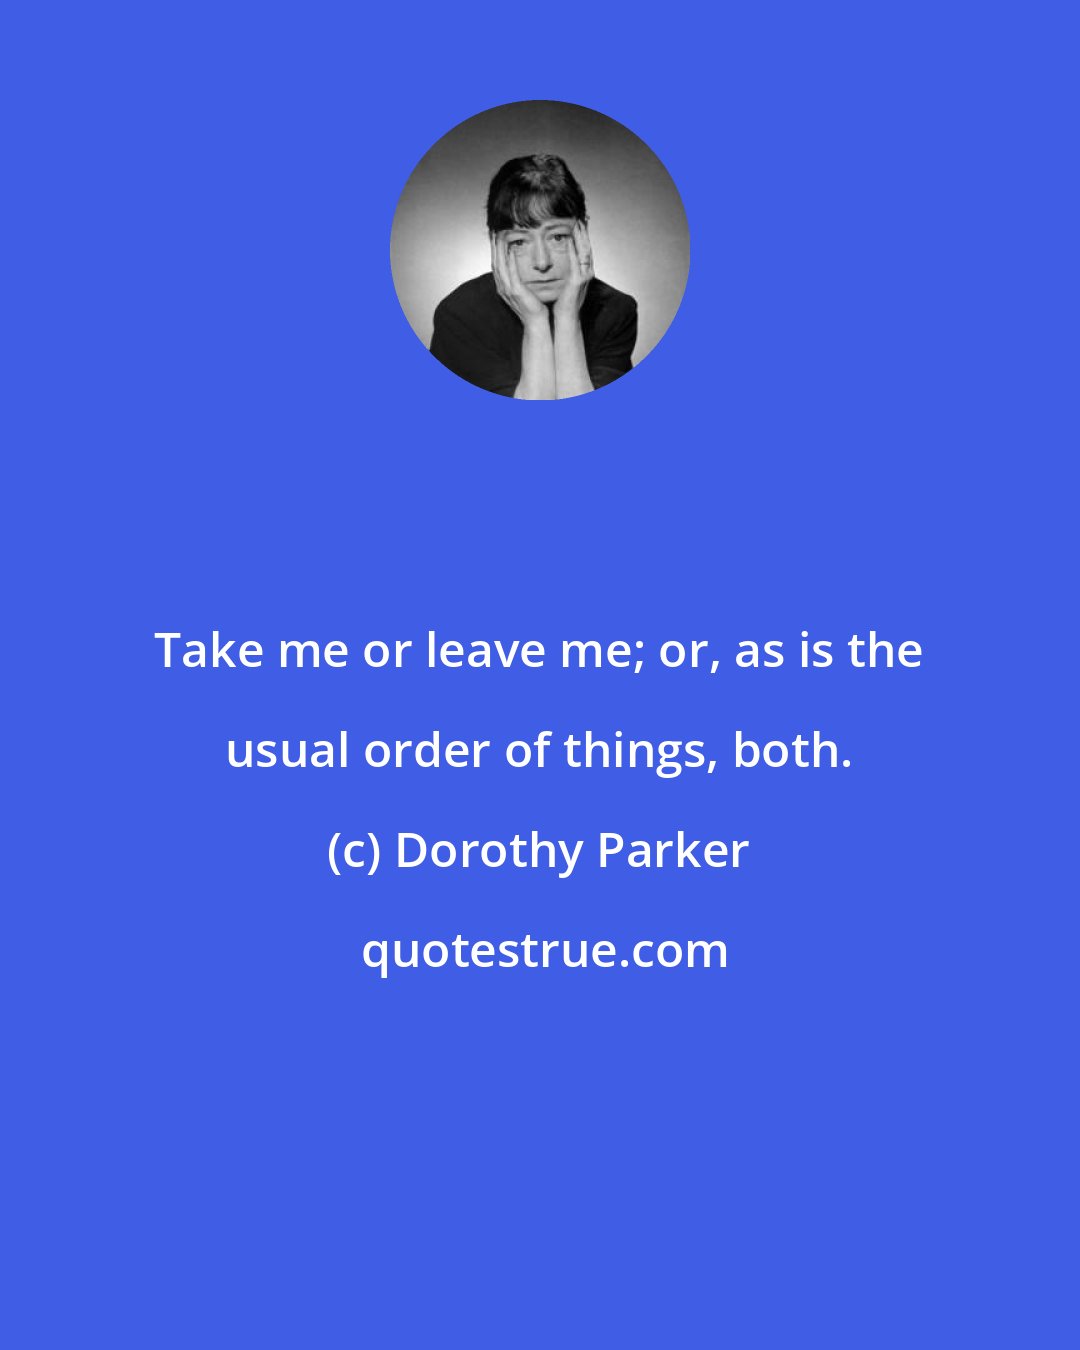 Dorothy Parker: Take me or leave me; or, as is the usual order of things, both.